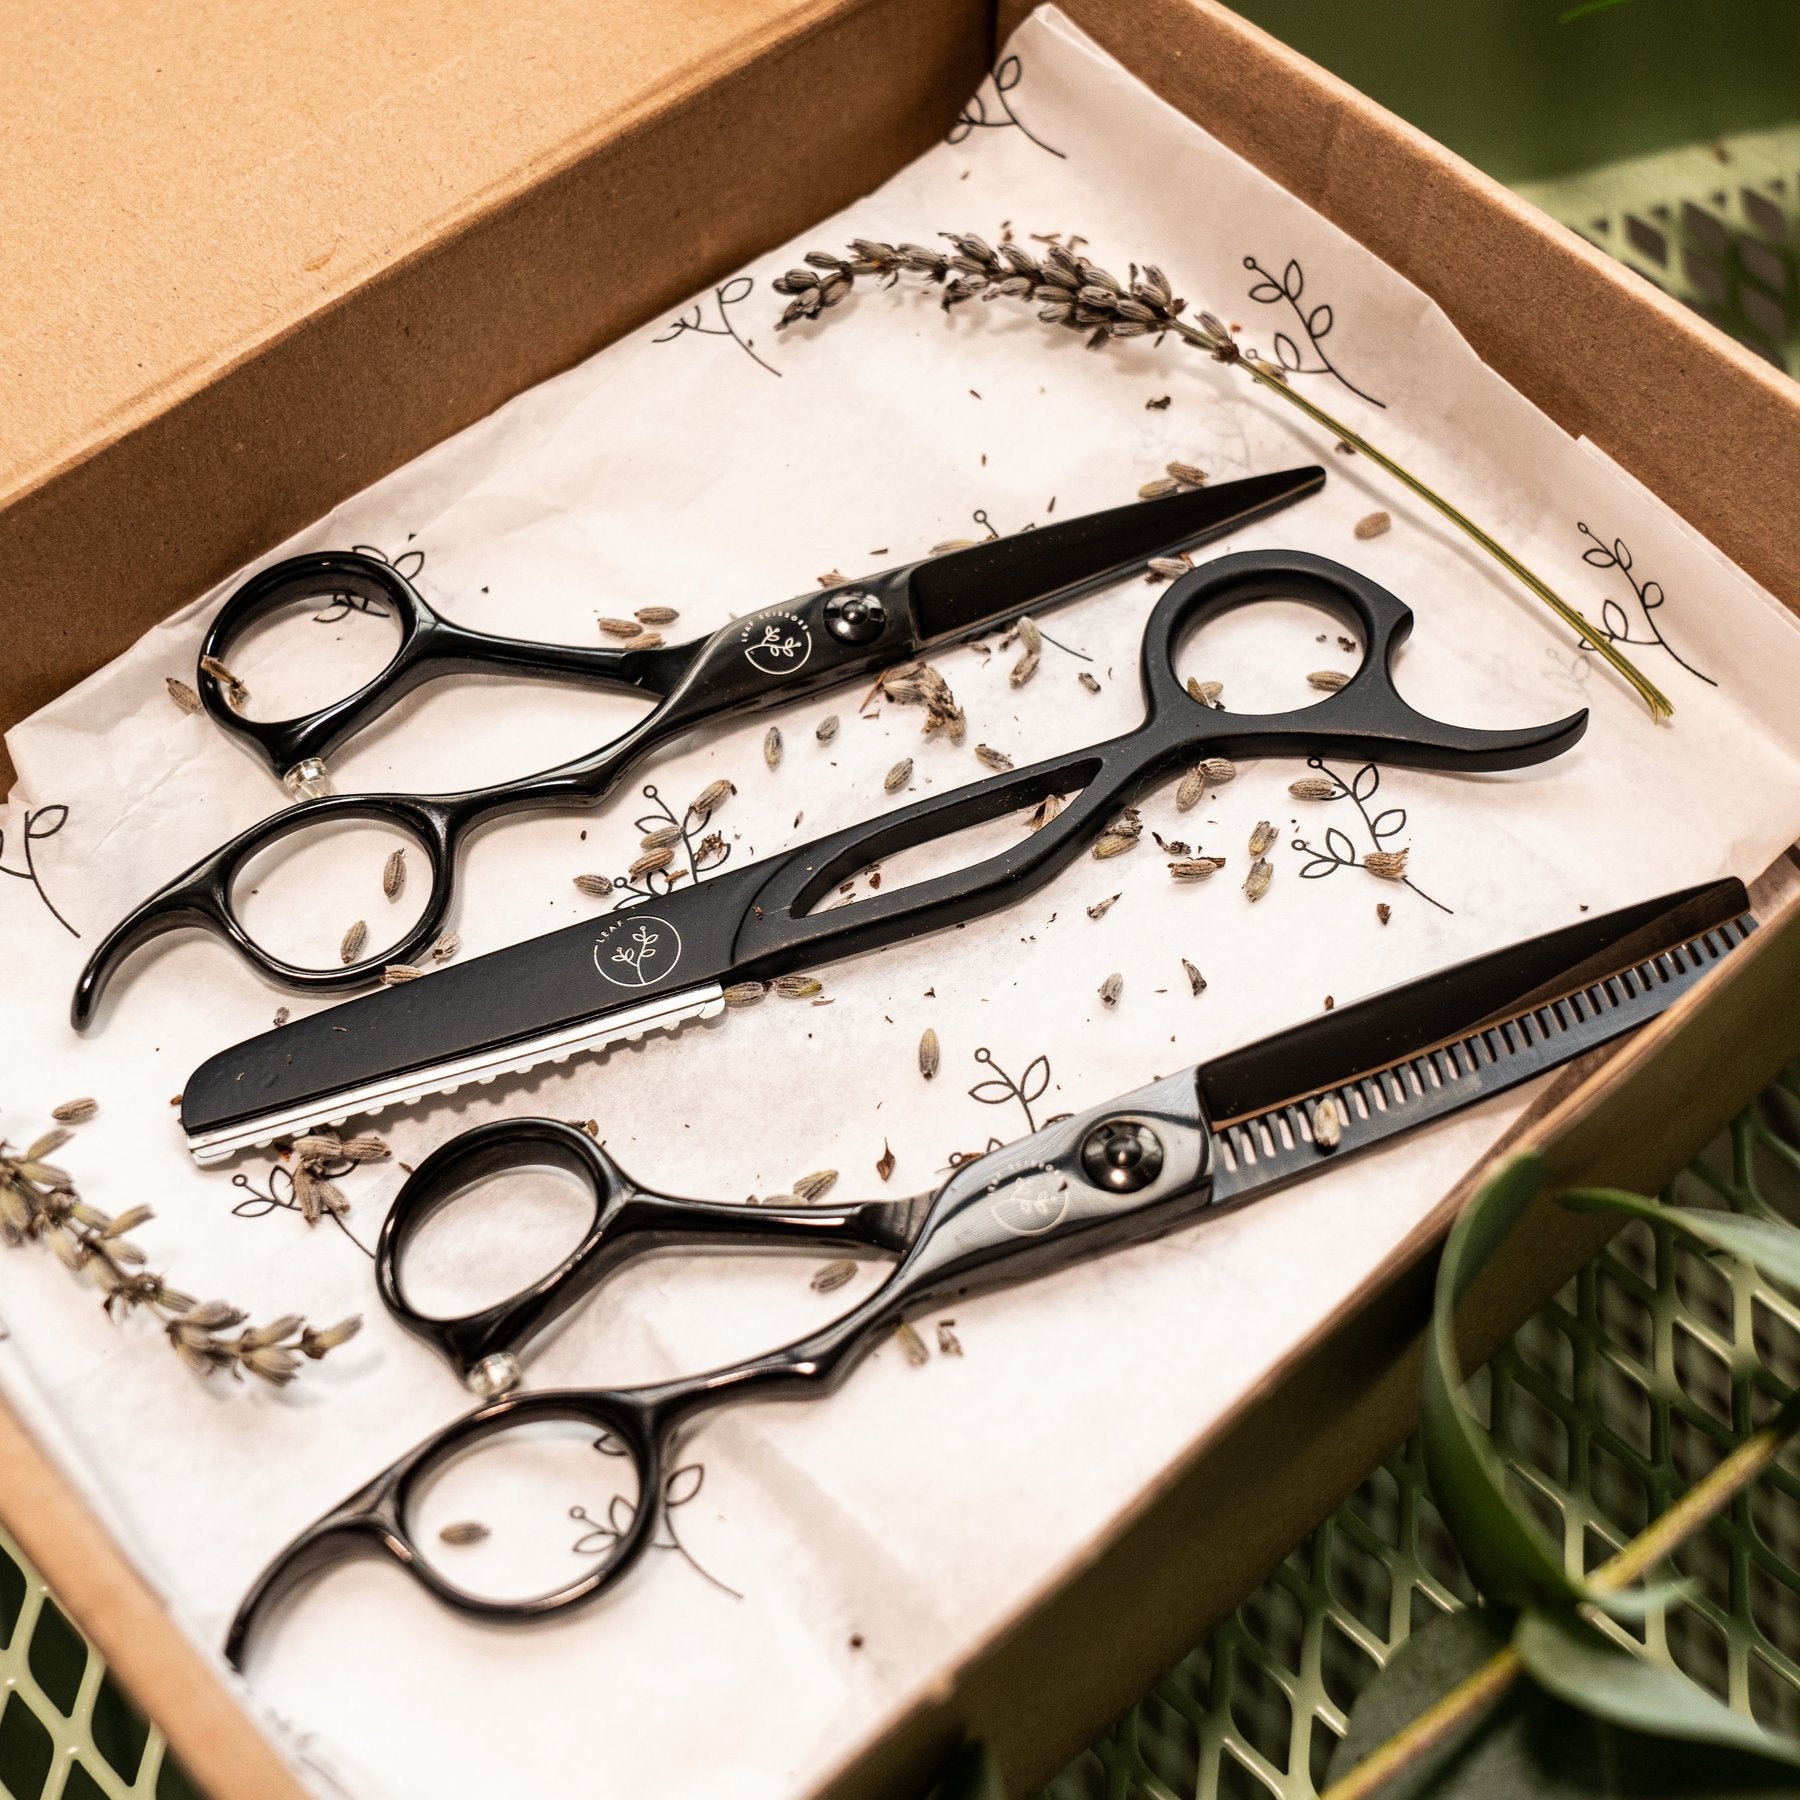 How to Sharpen Hair Scissors in Just 9 Minutes